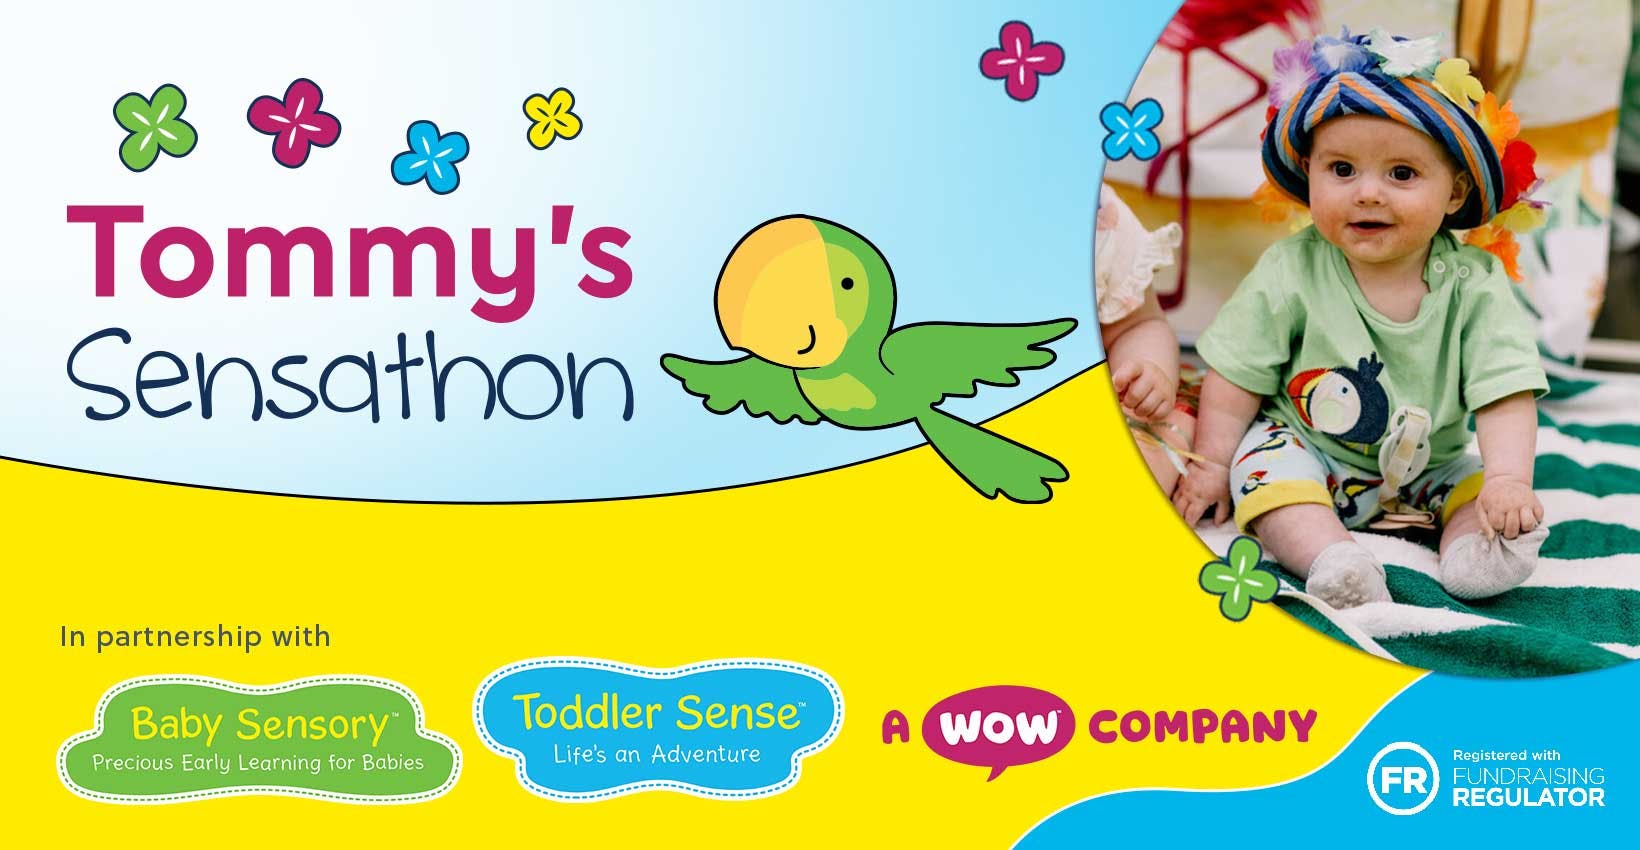 Tommy's Sensathon - parrot illustration and baby in hawaiian theme